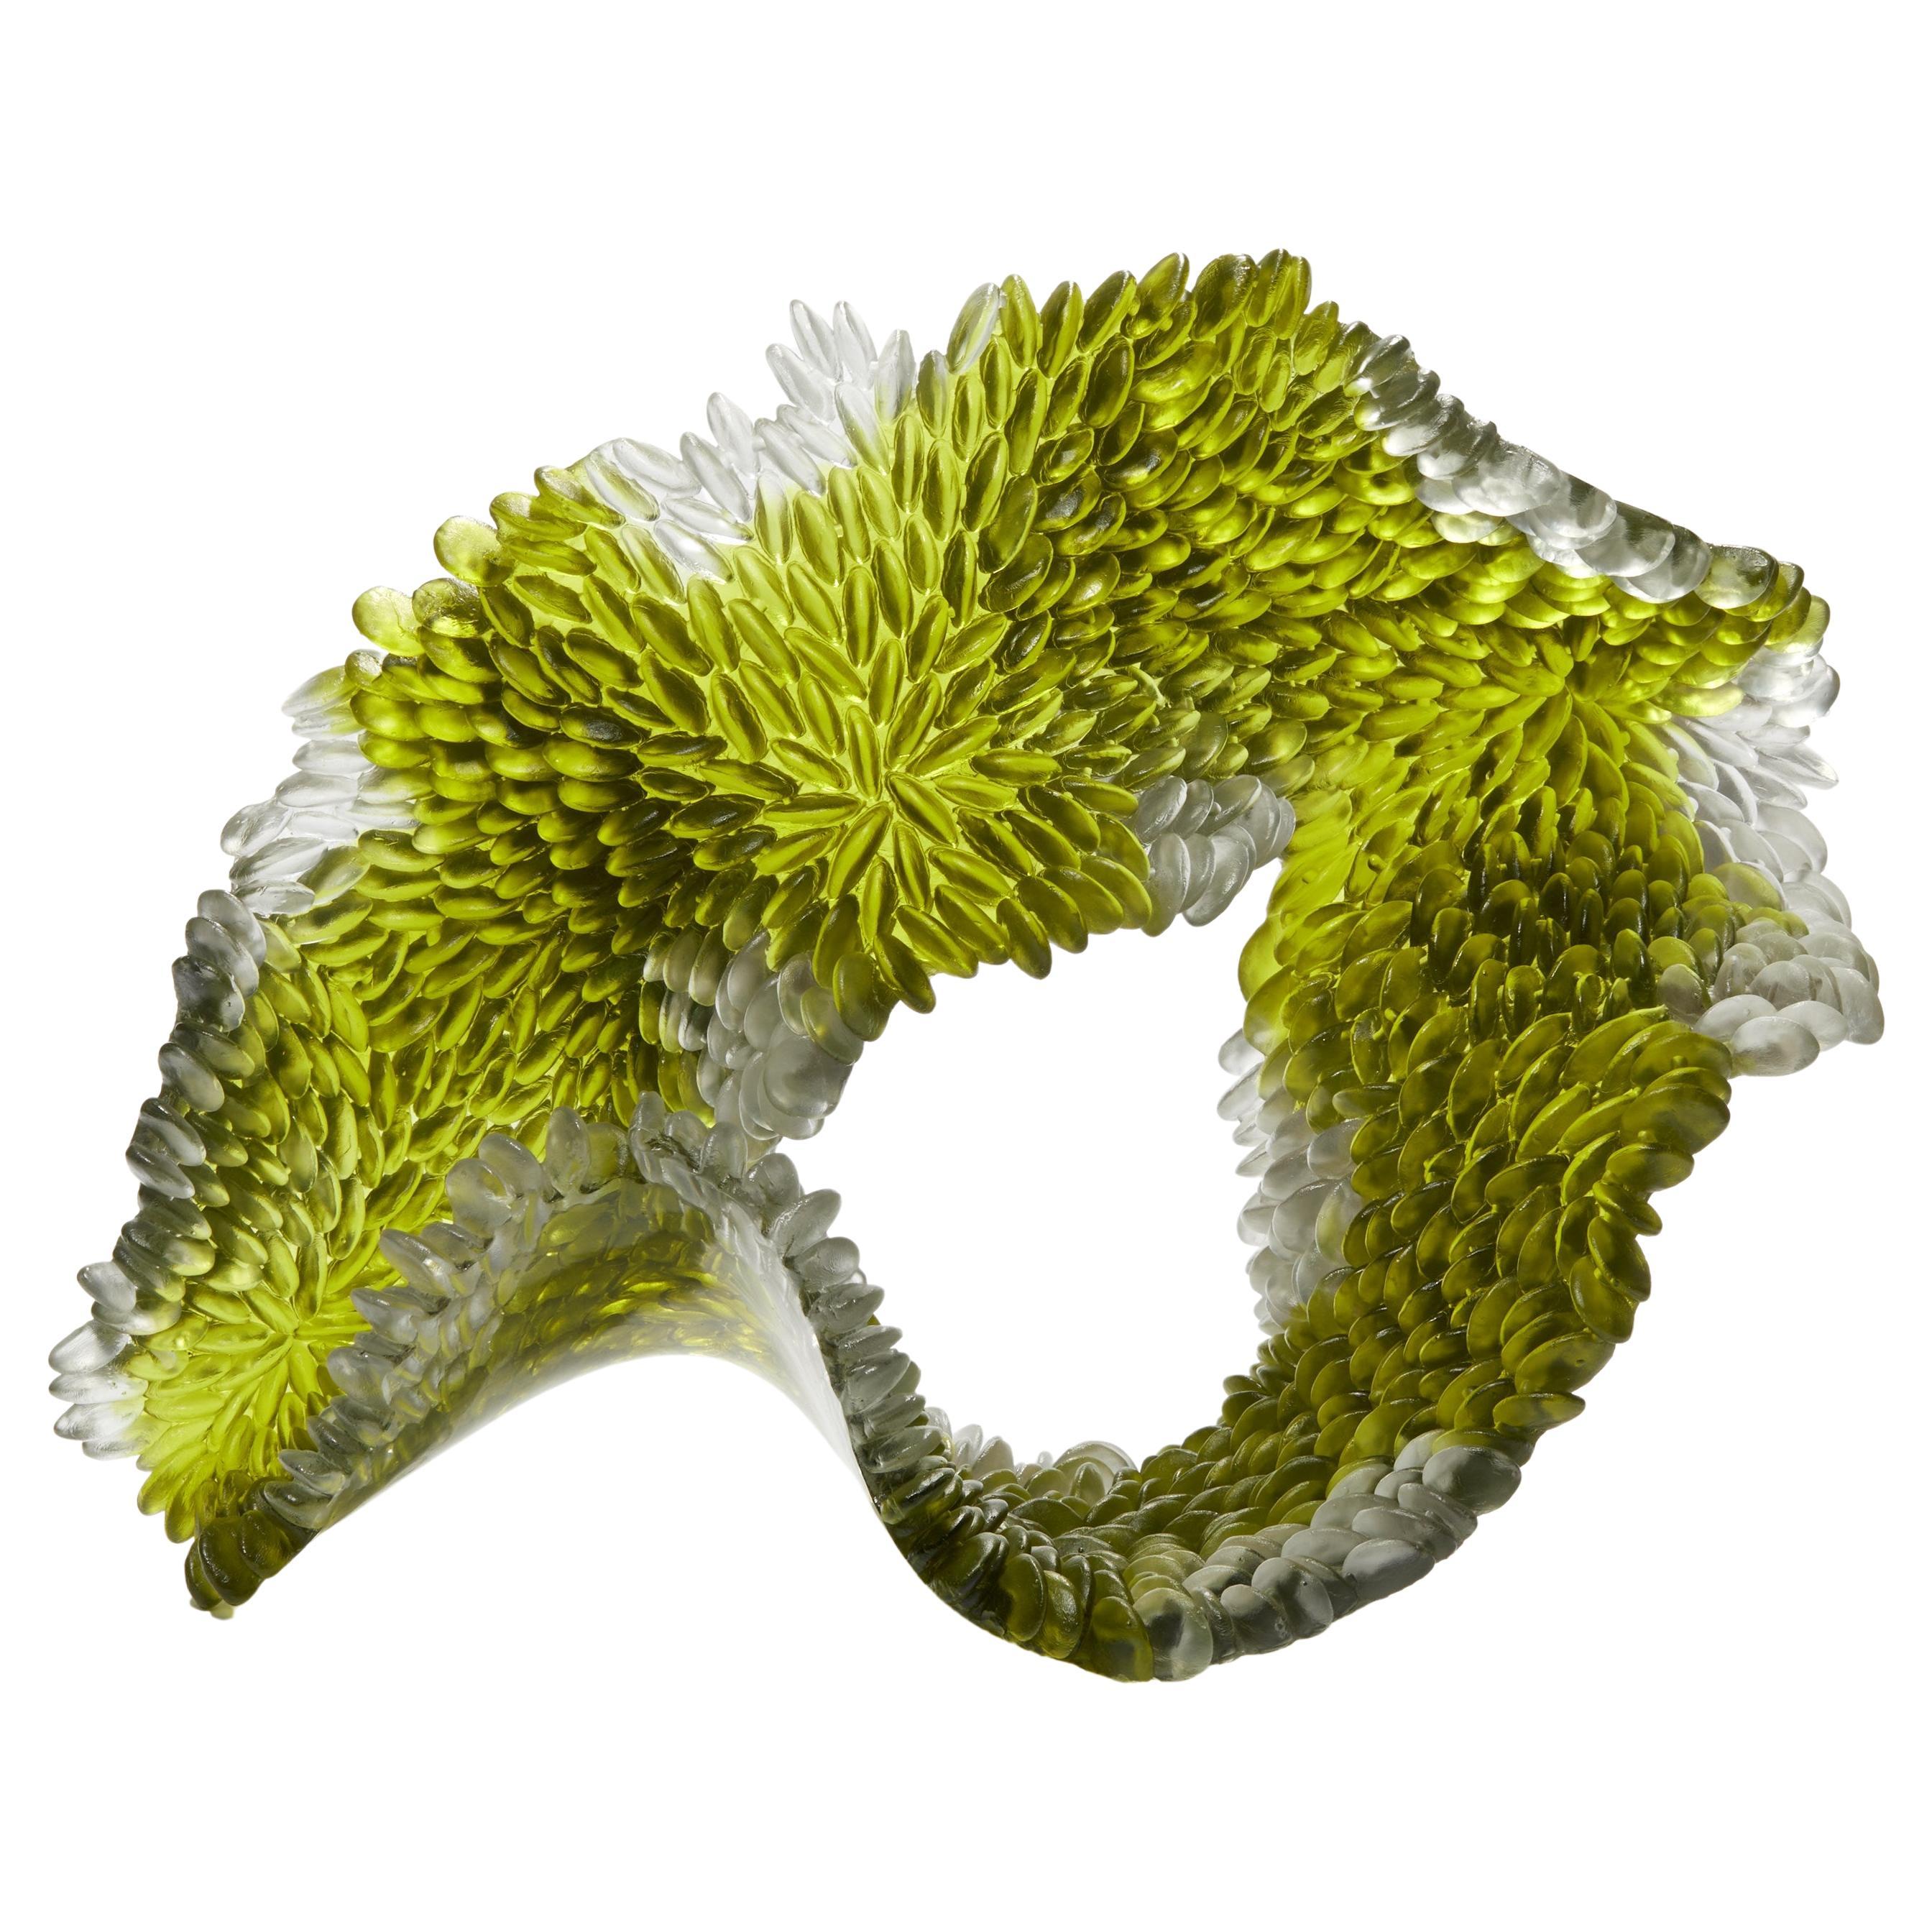  Foliage I, Olive Green & Grey Cast Glass Sculpture by Nina Casson McGarva